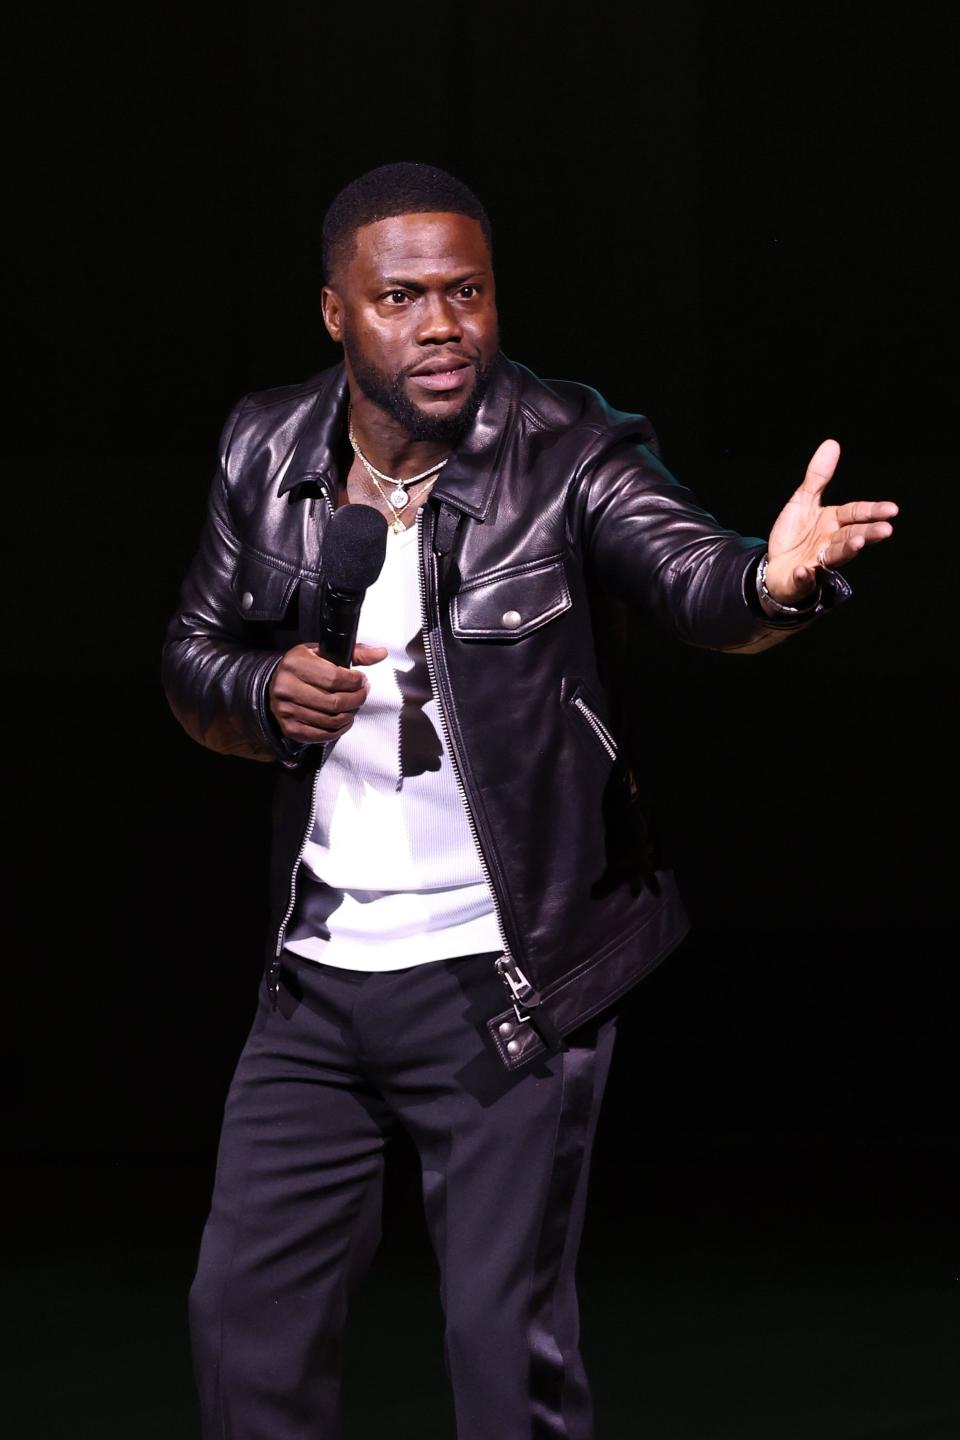 Comedian Hart brings his "Brand New Material" tour to the Prudential Center in Newark on June 30. He is shown performing in New York on Oct. 18, 2023.